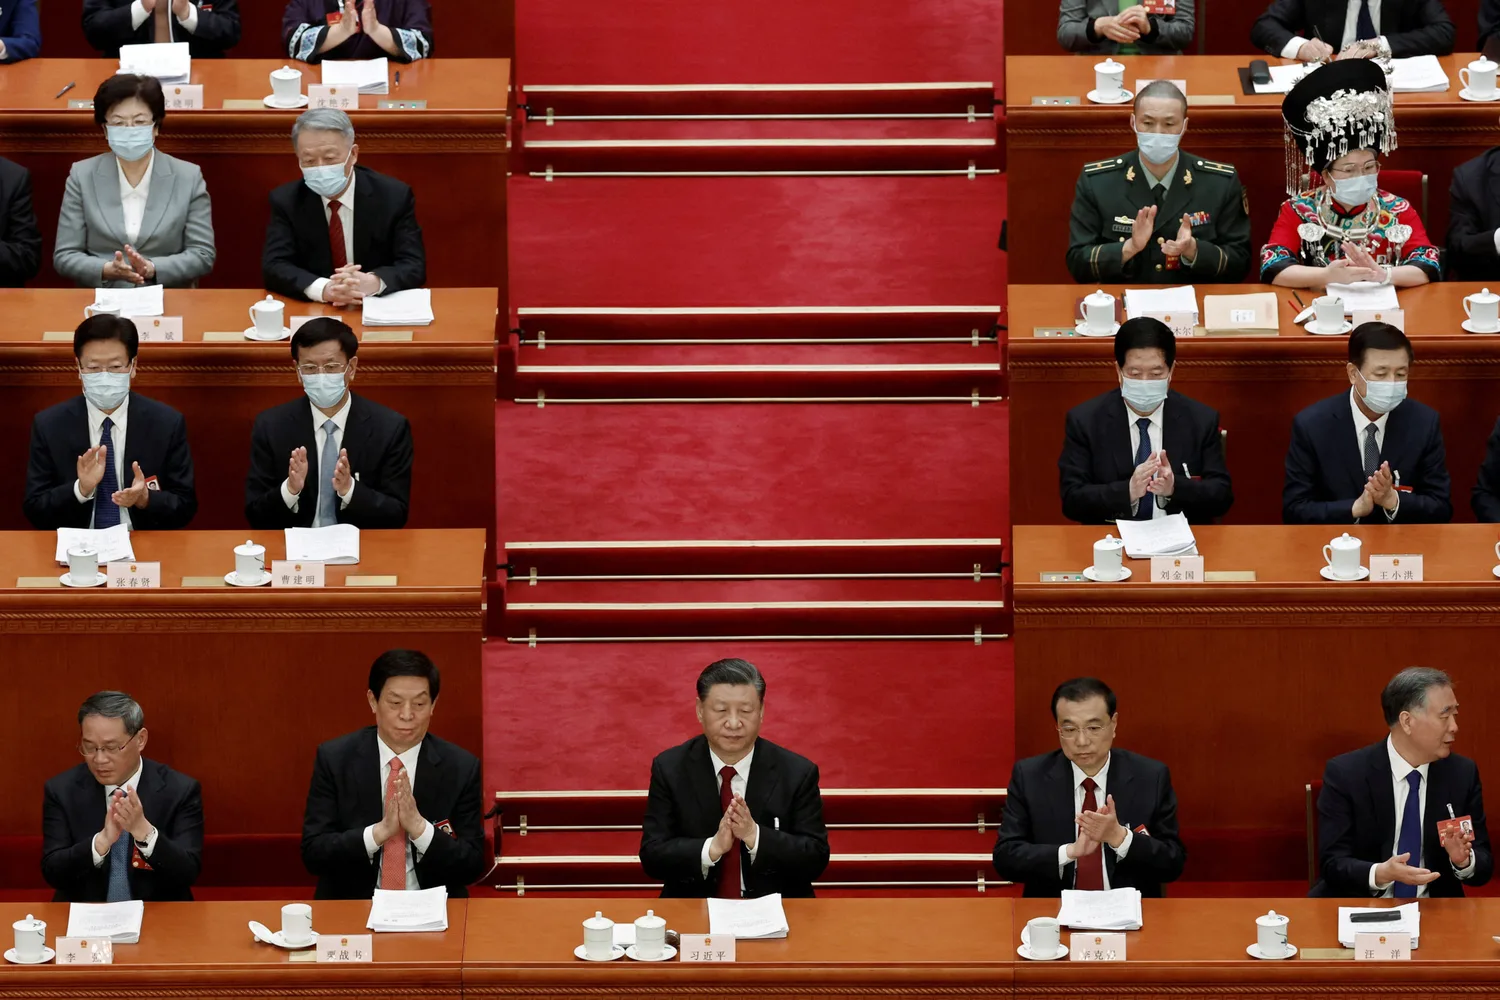 What is China’s “National Two Sessions”?